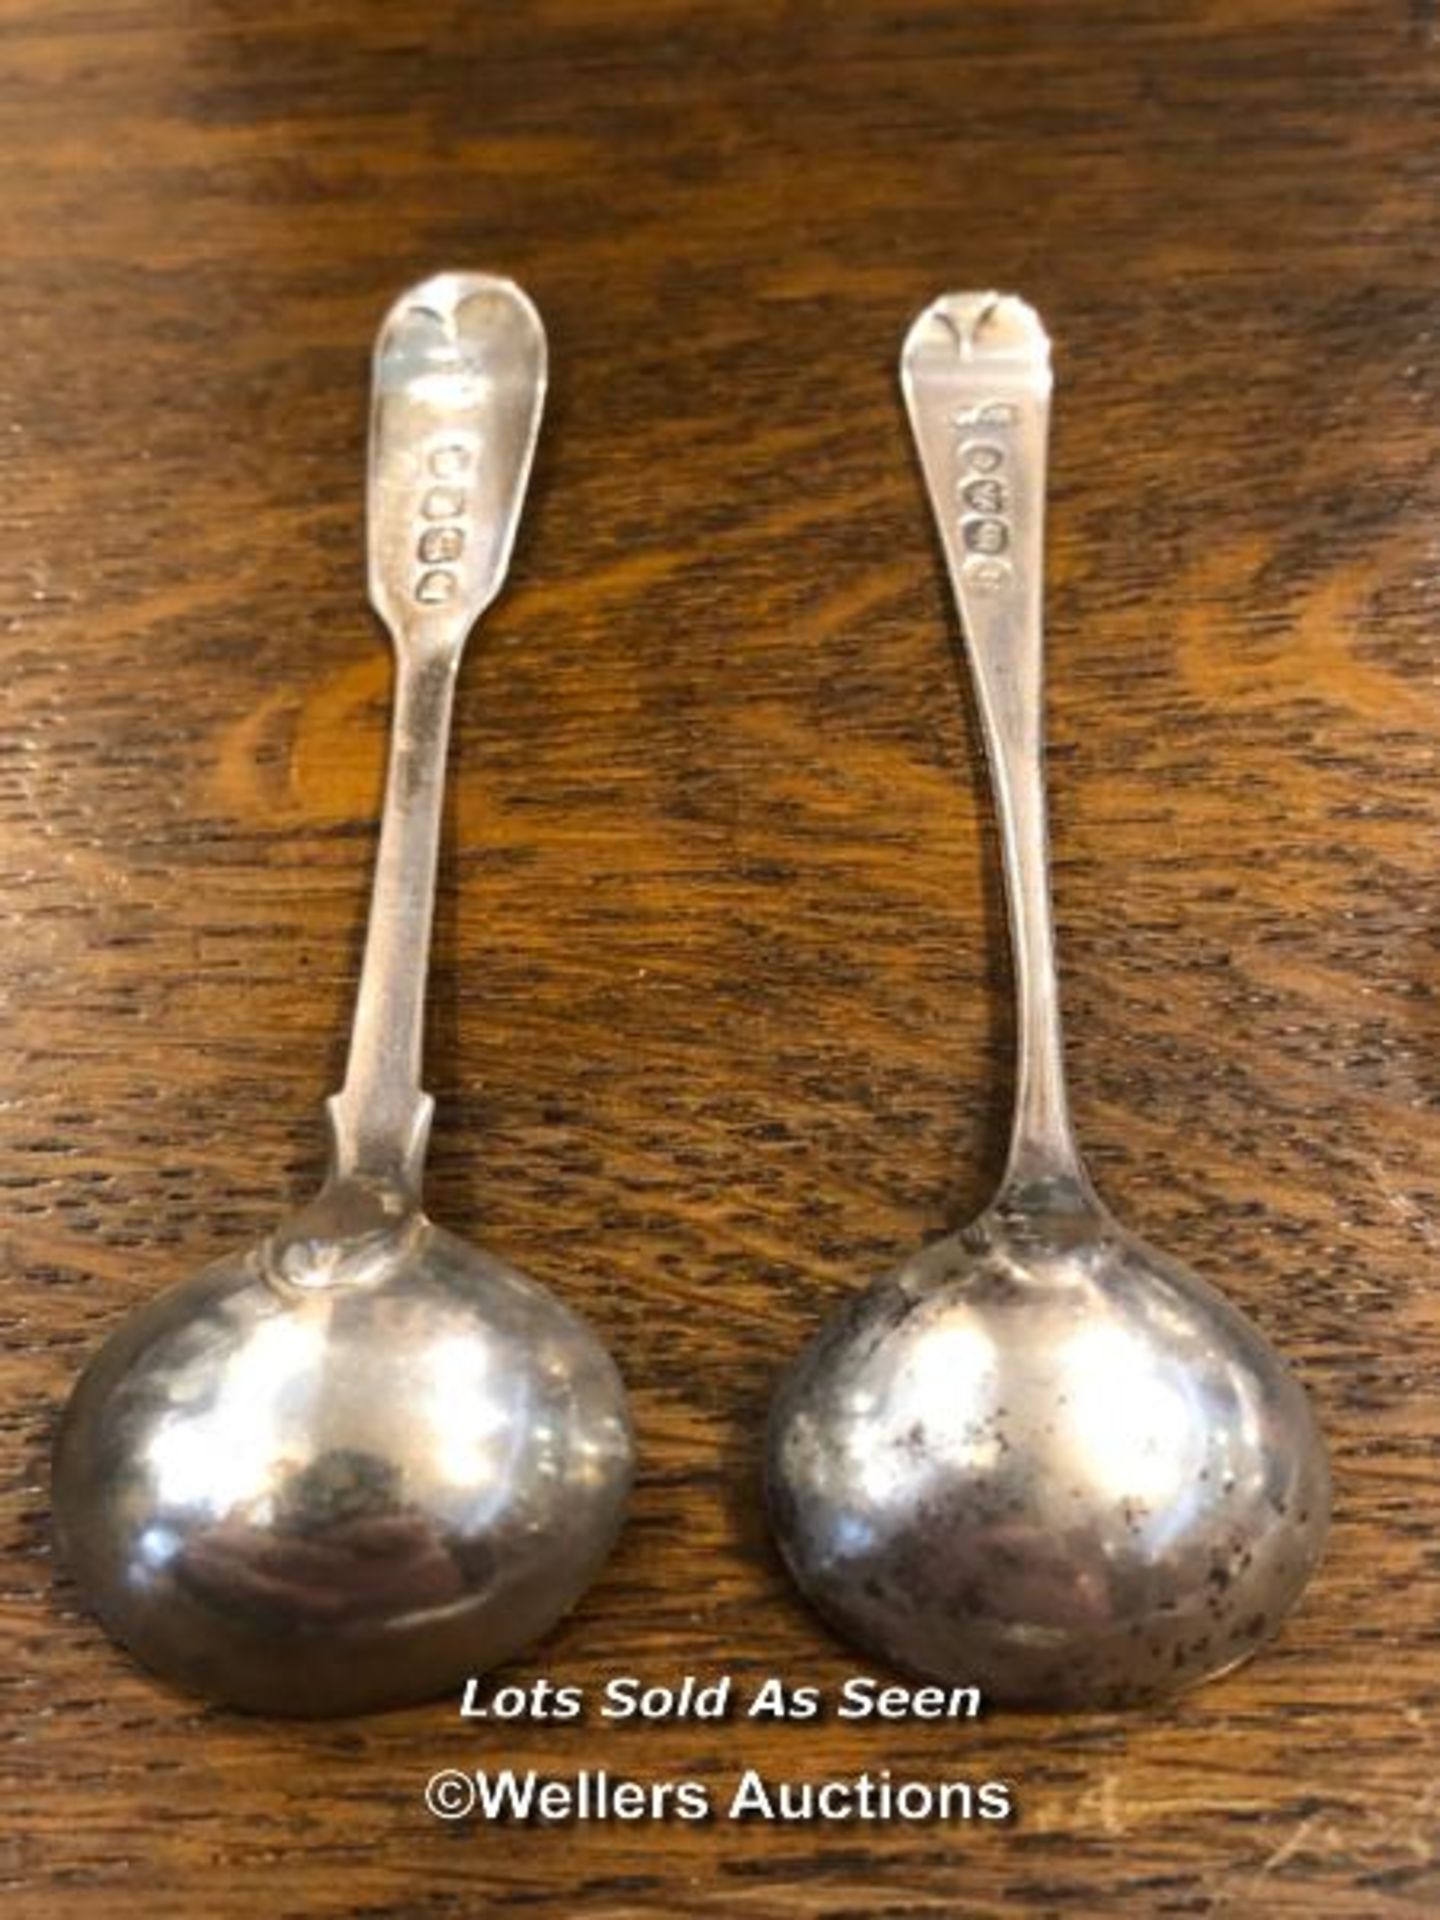 *TWO 18TH CENTURY SILVER SPOONS, ONE BY WILLIAM BATEMAN, LONDON 1781 / LOCATED AT VICTORIA ANTIQUES, - Image 2 of 4